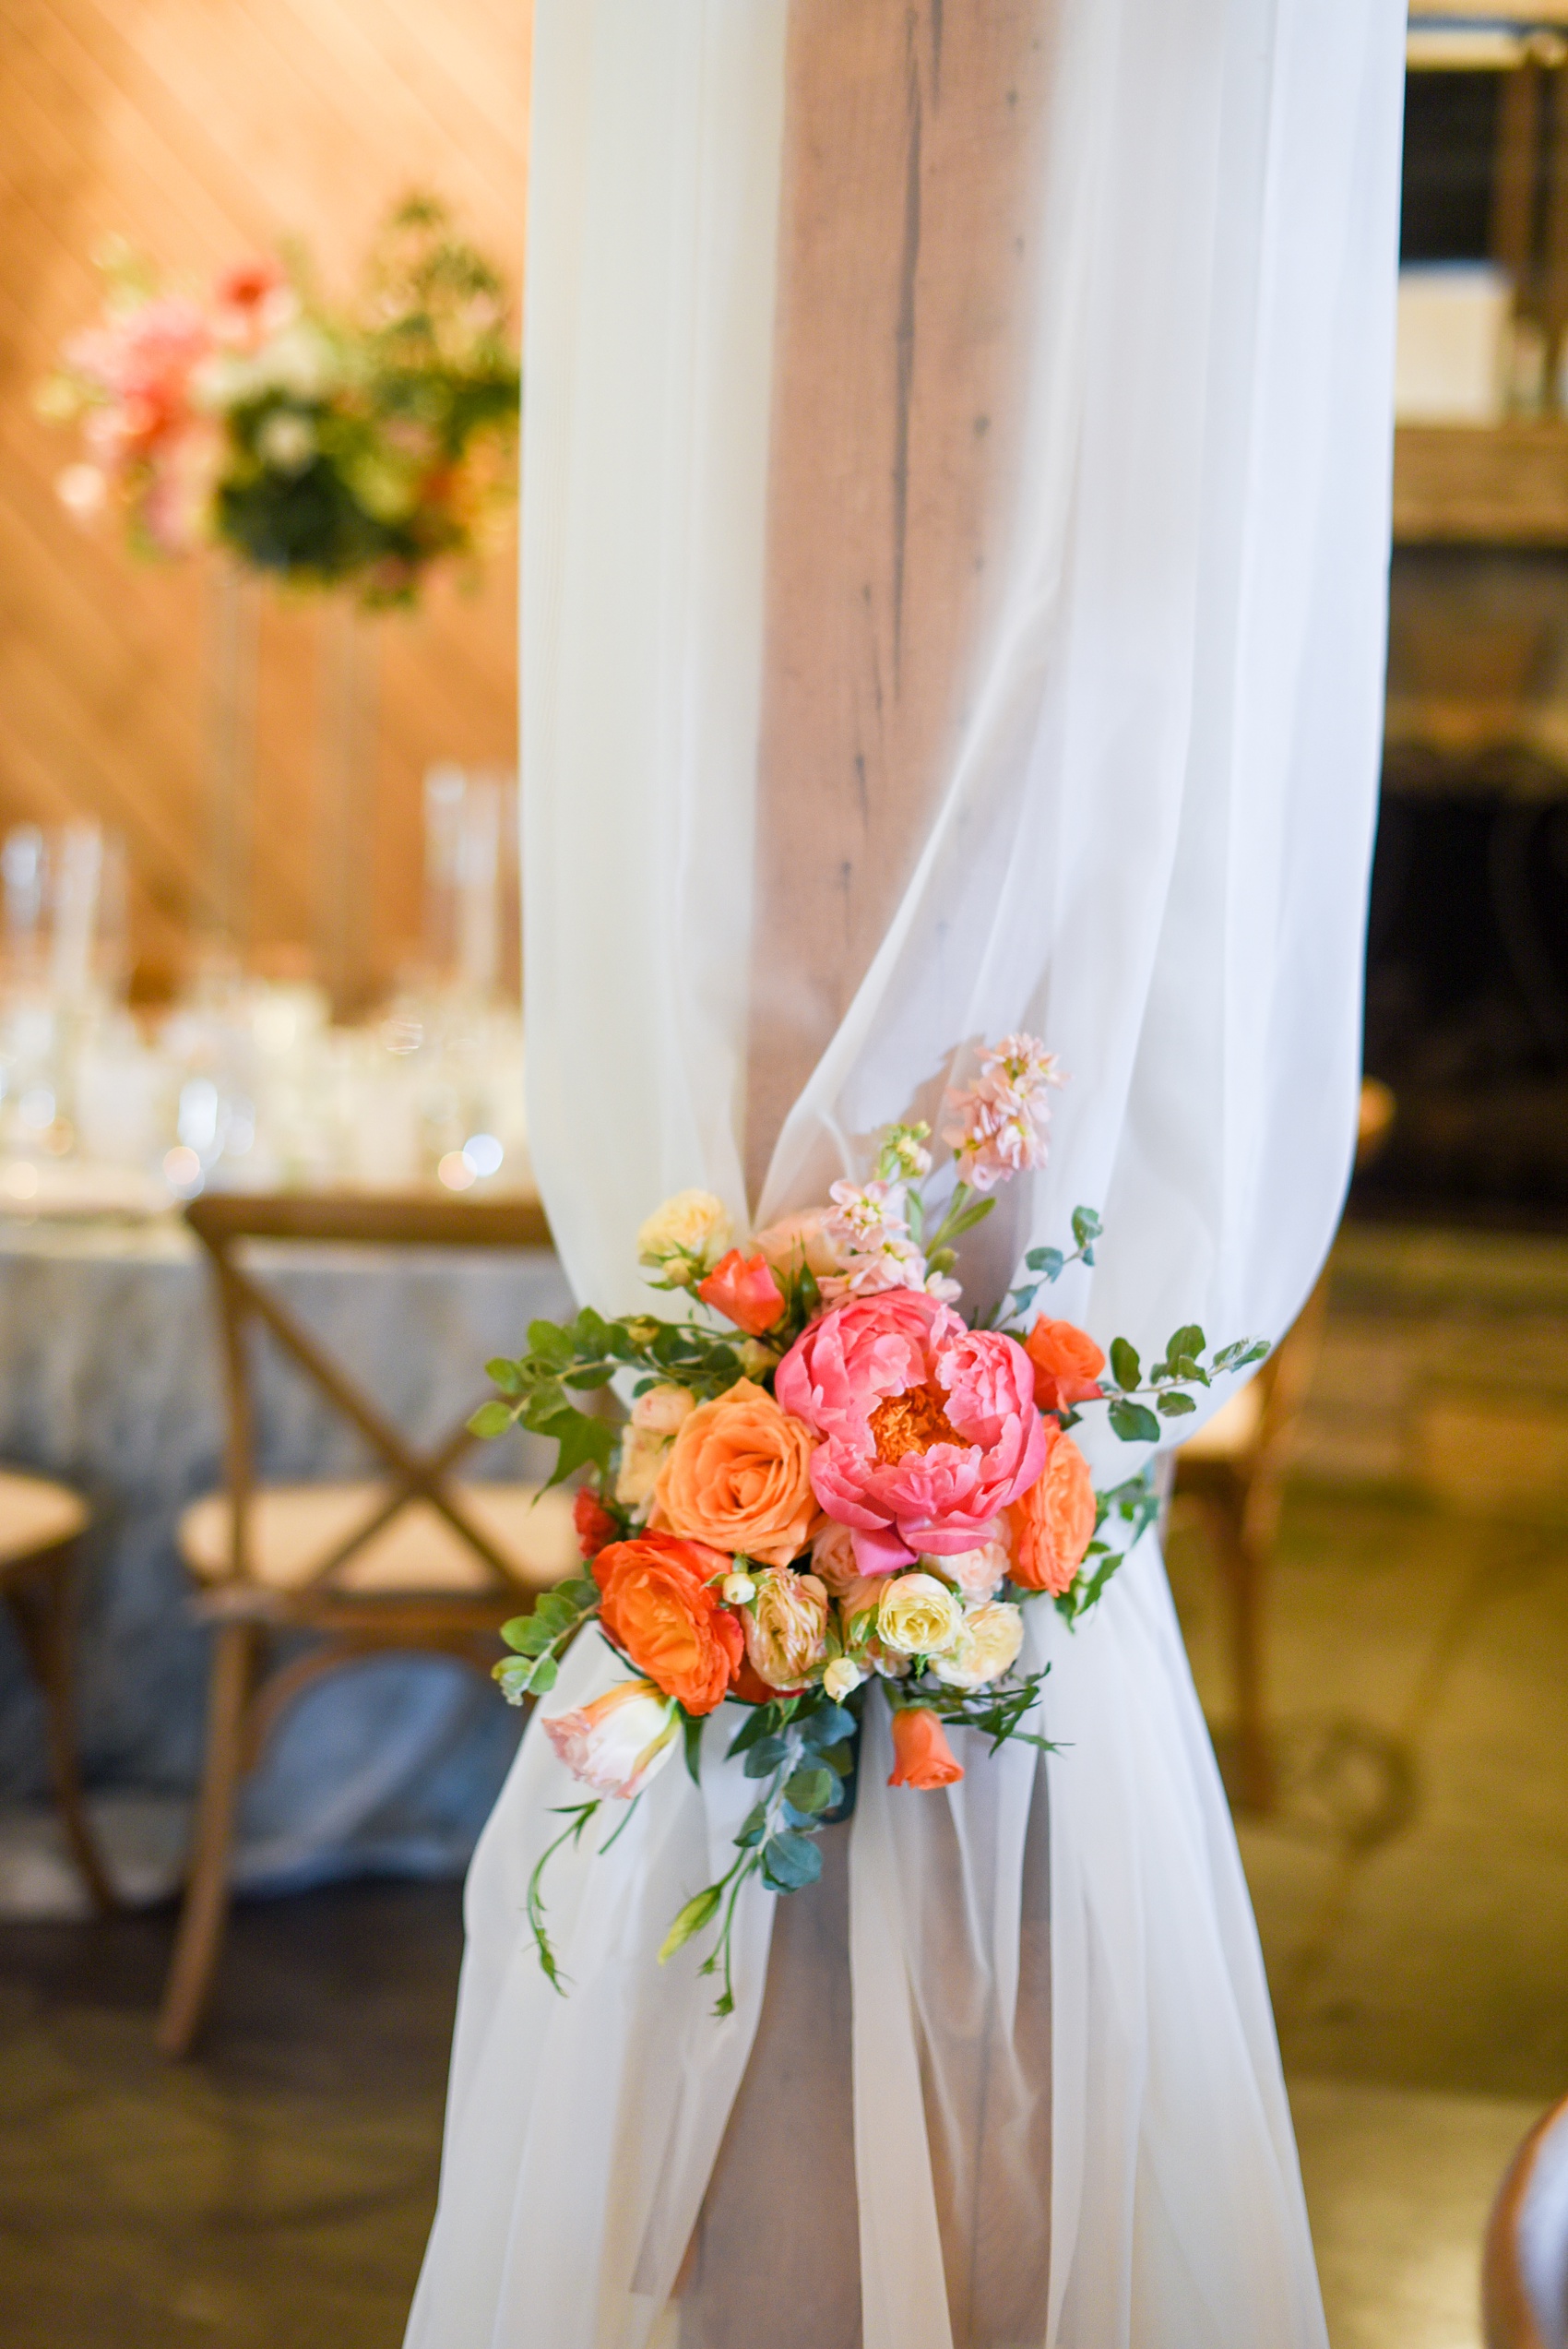 Charlottesville wedding photos by Mikkel Paige Photography. This Virginia venue is perfect for brides and grooms looking for a beautiful farm reception space. It’s green, romantic, and easy to dress up with flowers or keep simple. Custom draping was tied with colorful flowers including eucalyptus, garden roses, peonies, and ranunculus. Click through for the complete post from this May event at the Lodge at Mount Ida Farm! Planning and design by @vivalevent and flowers by @apassarelli of Meristem Floral. #Charlottesville #mountidafarm #lodgeatmountida #CharlottesvilleVA #CharlottesvilleVirginia #Charlottesvillewedding #Charlottesvilleweddingphotographer #mikkelpaige #MeristemFloral #VivaLEvent